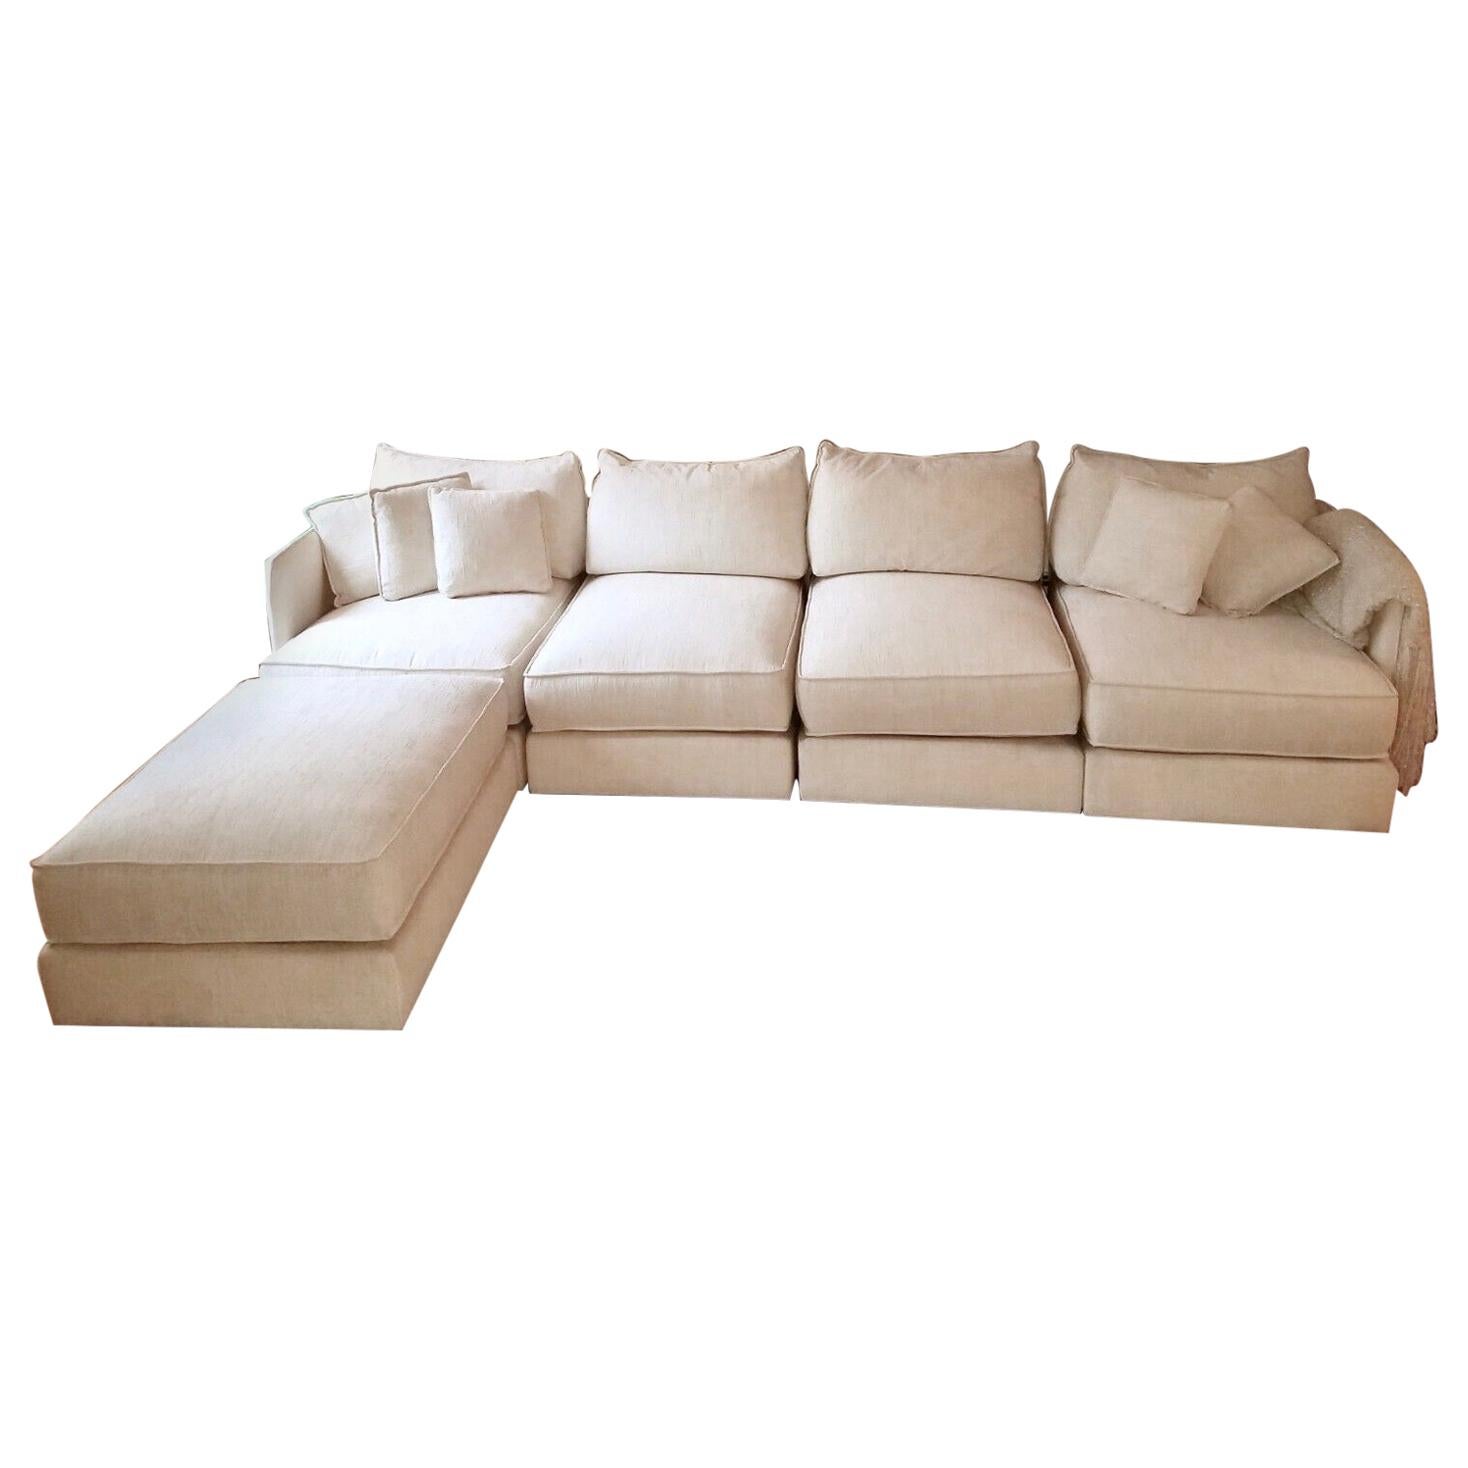 Vintage Baker Furniture Sectional Sofa with Ottoman, Four-Seat, Down, Linen